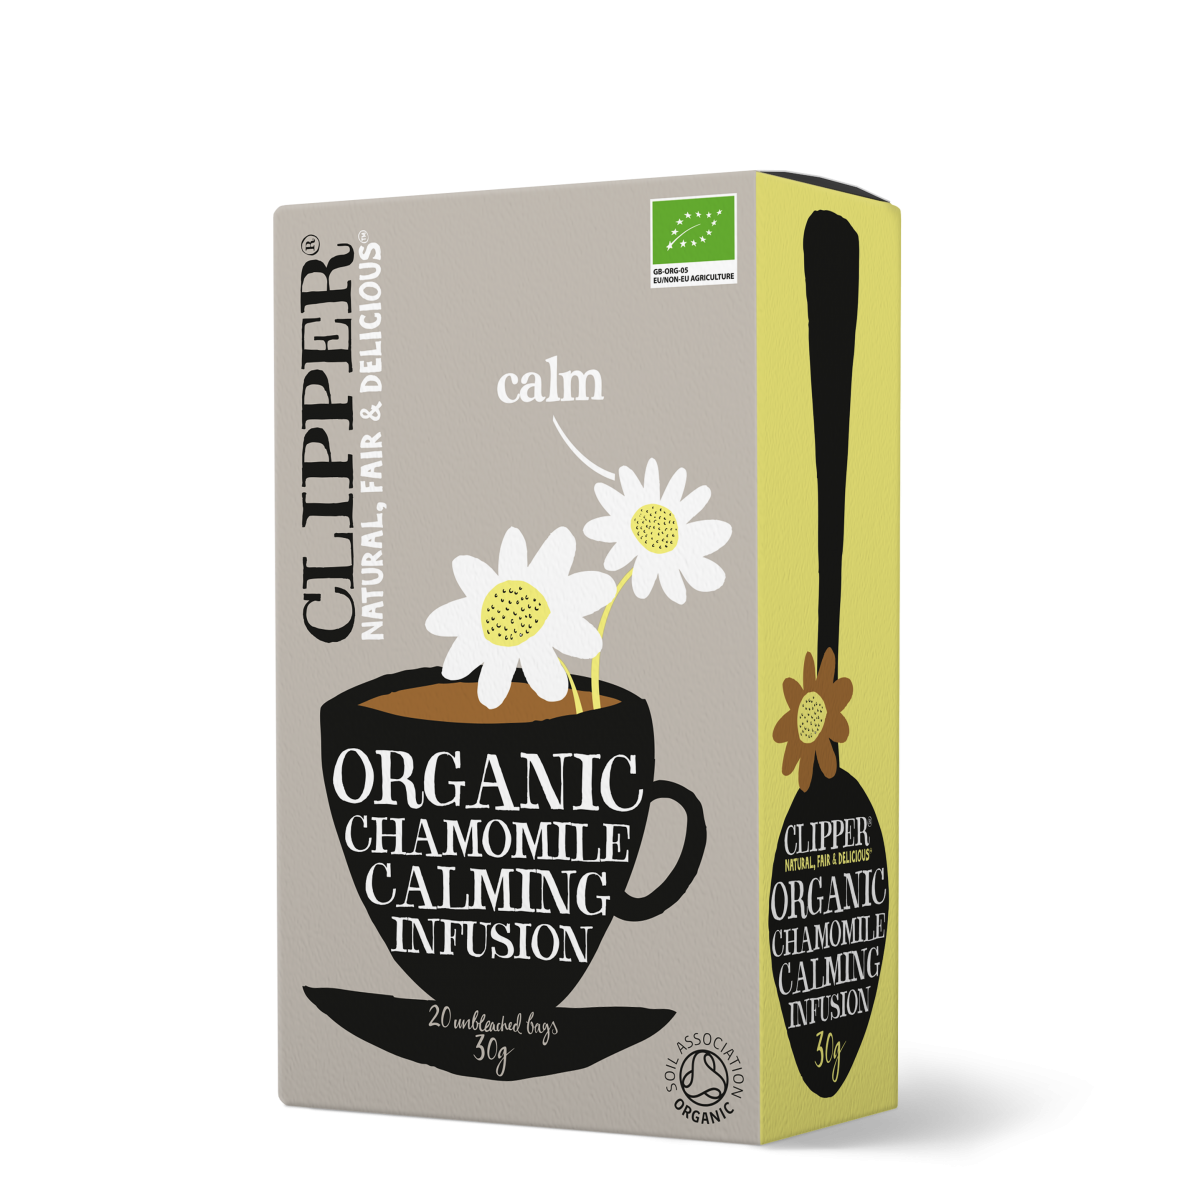 Clipper Organic Calming Chamomile Infusion 20 Enveloped Bags 30g